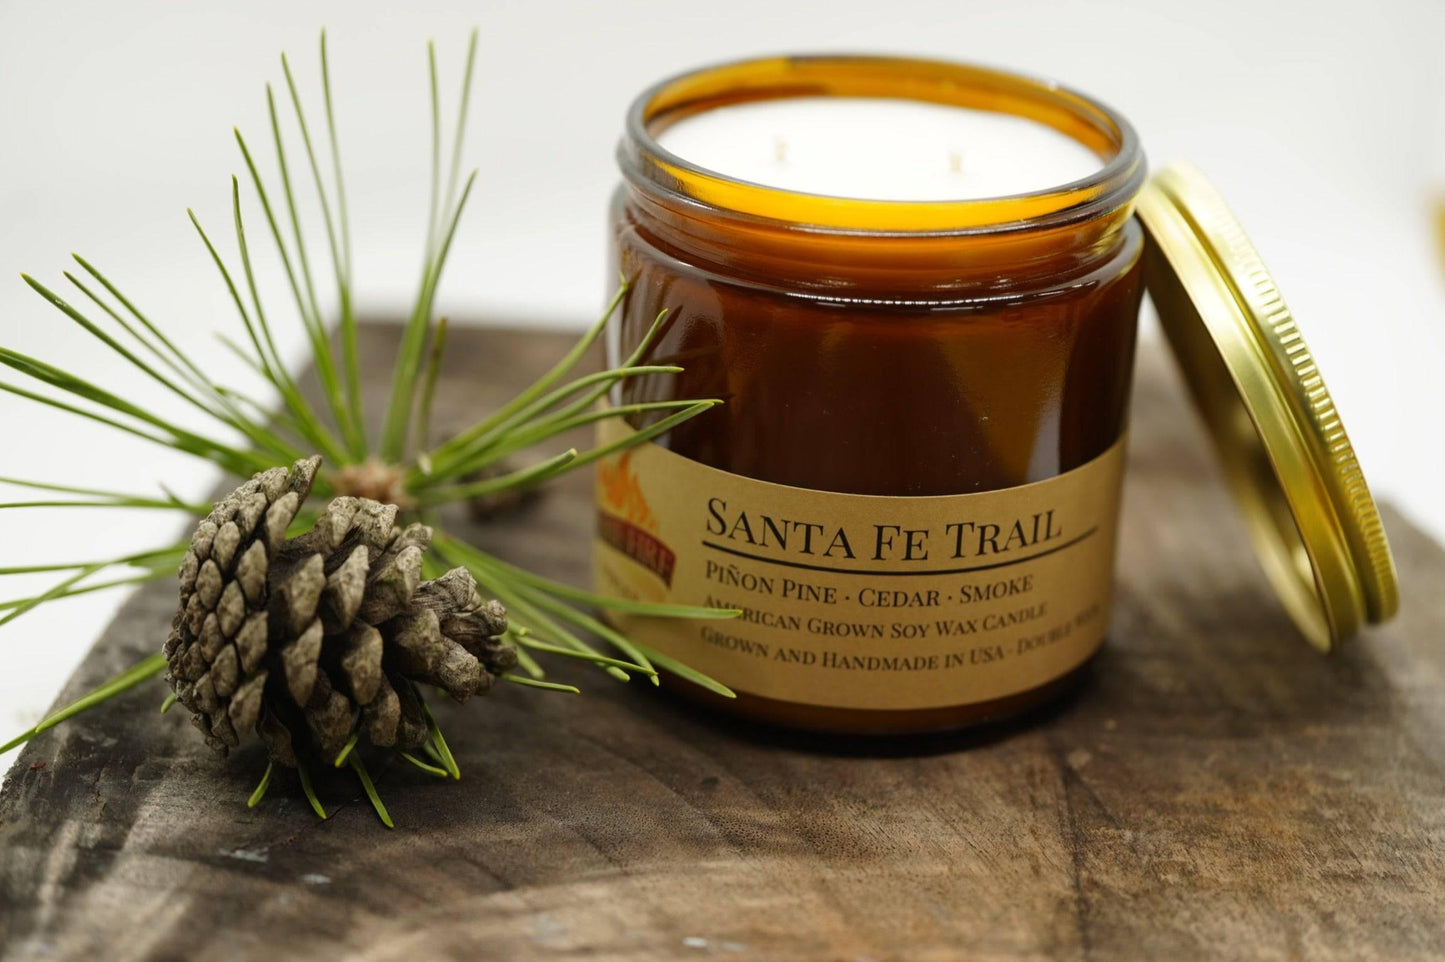 Santa Fe Trail Soy Wax Candle | 16 oz Double Wick Amber Apothecary Jar - Prairie Fire Candles